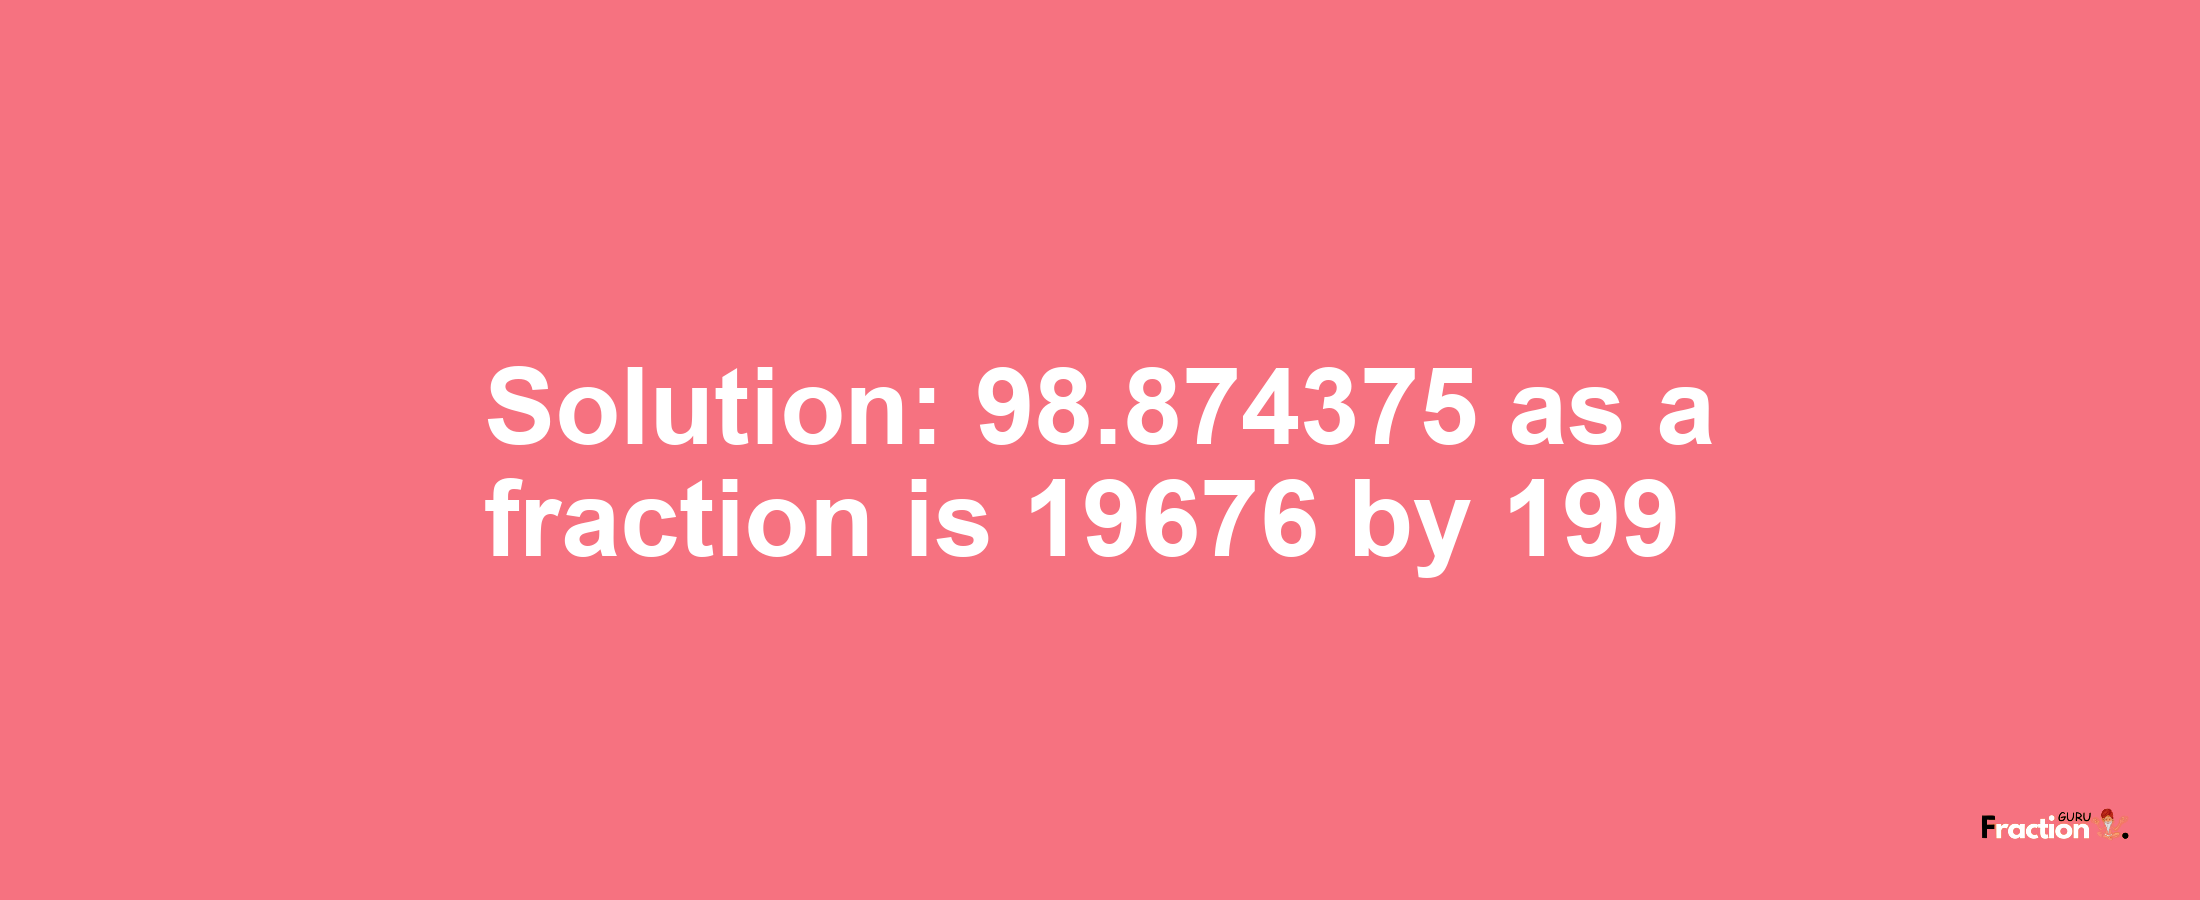 Solution:98.874375 as a fraction is 19676/199